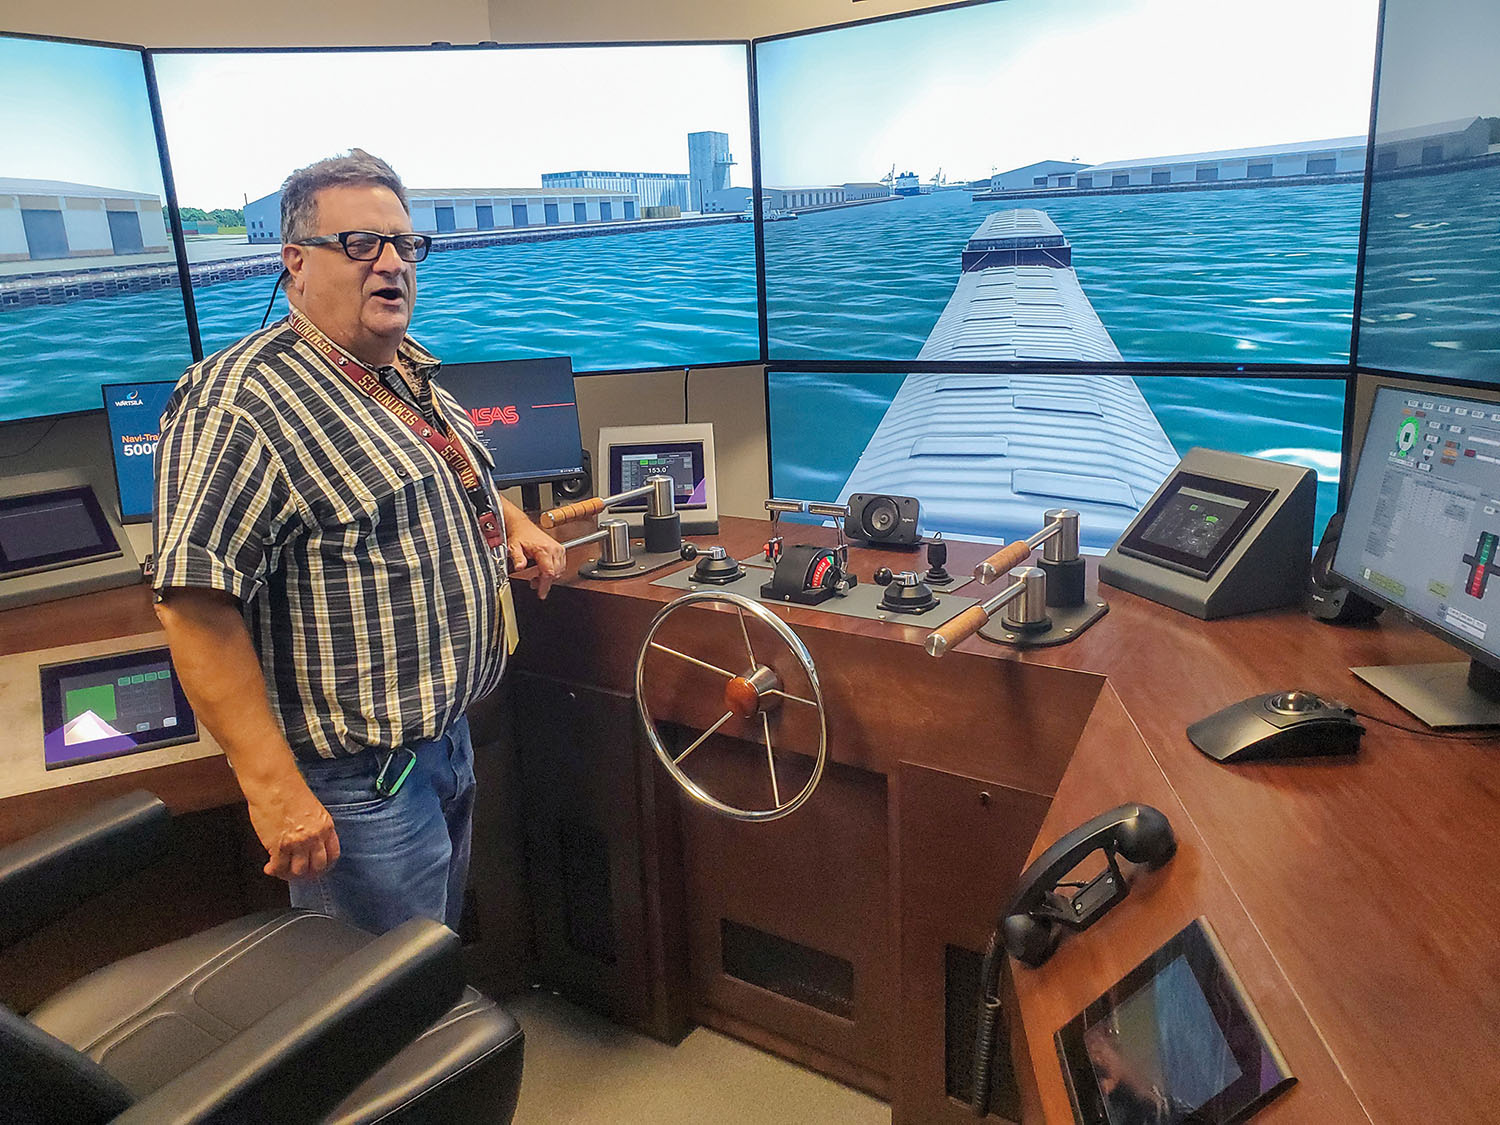 Capt. Randy Savoie demonstrates the use of rudder sticks during a simulated transit of the upper Houston Ship Channel, using a Transas computer simulator at Northshore Technical Community College. (photo by Capt. Richard Eberhardt)